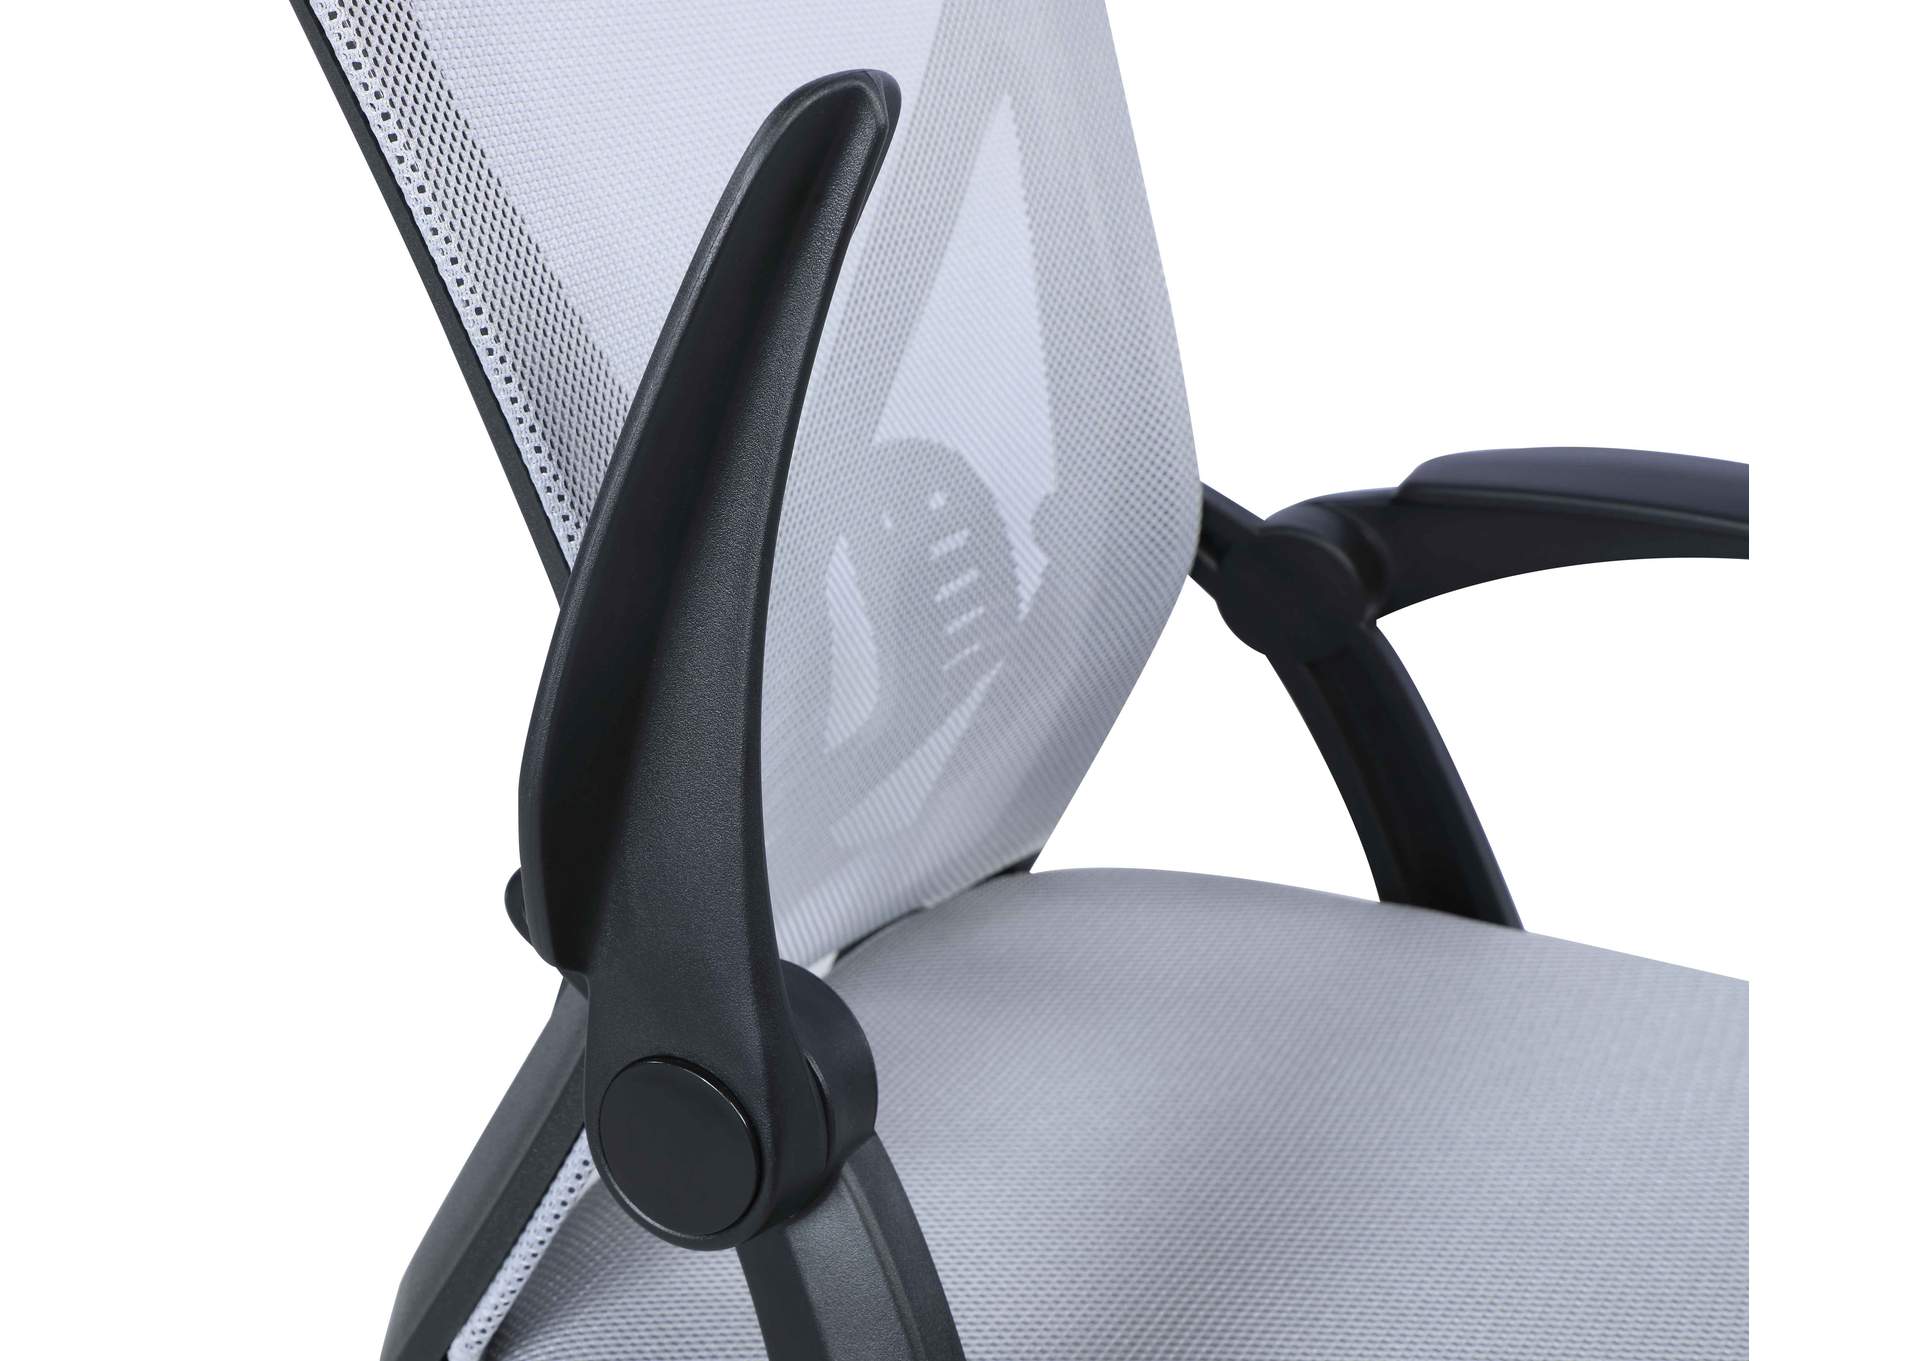 Contemporary Ergonomic Computer Chair With Adjustable Arms,Chintaly Imports